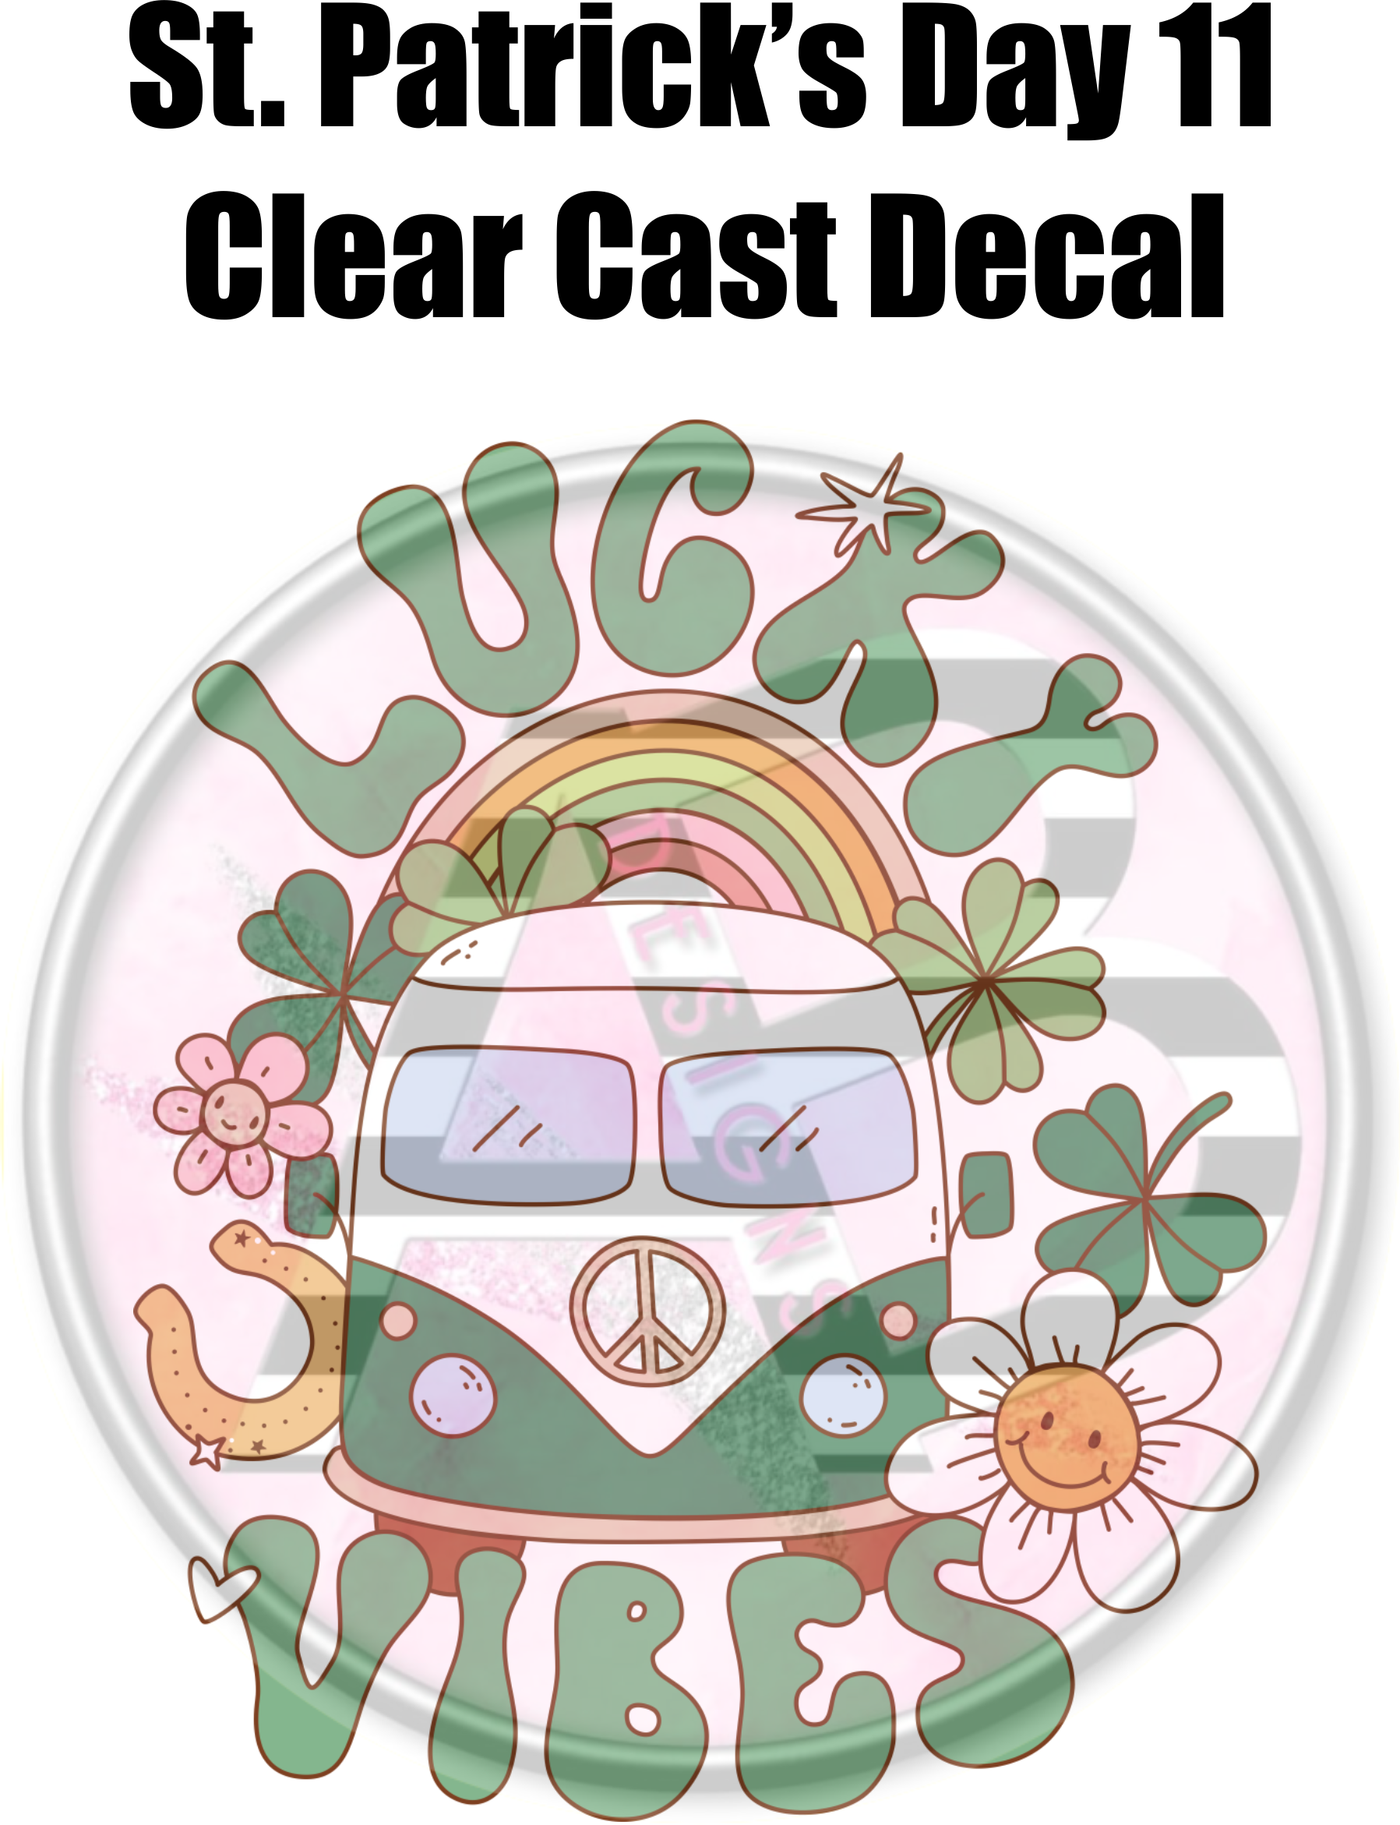 St. Patrick's Day 11 - Clear Cast Decal